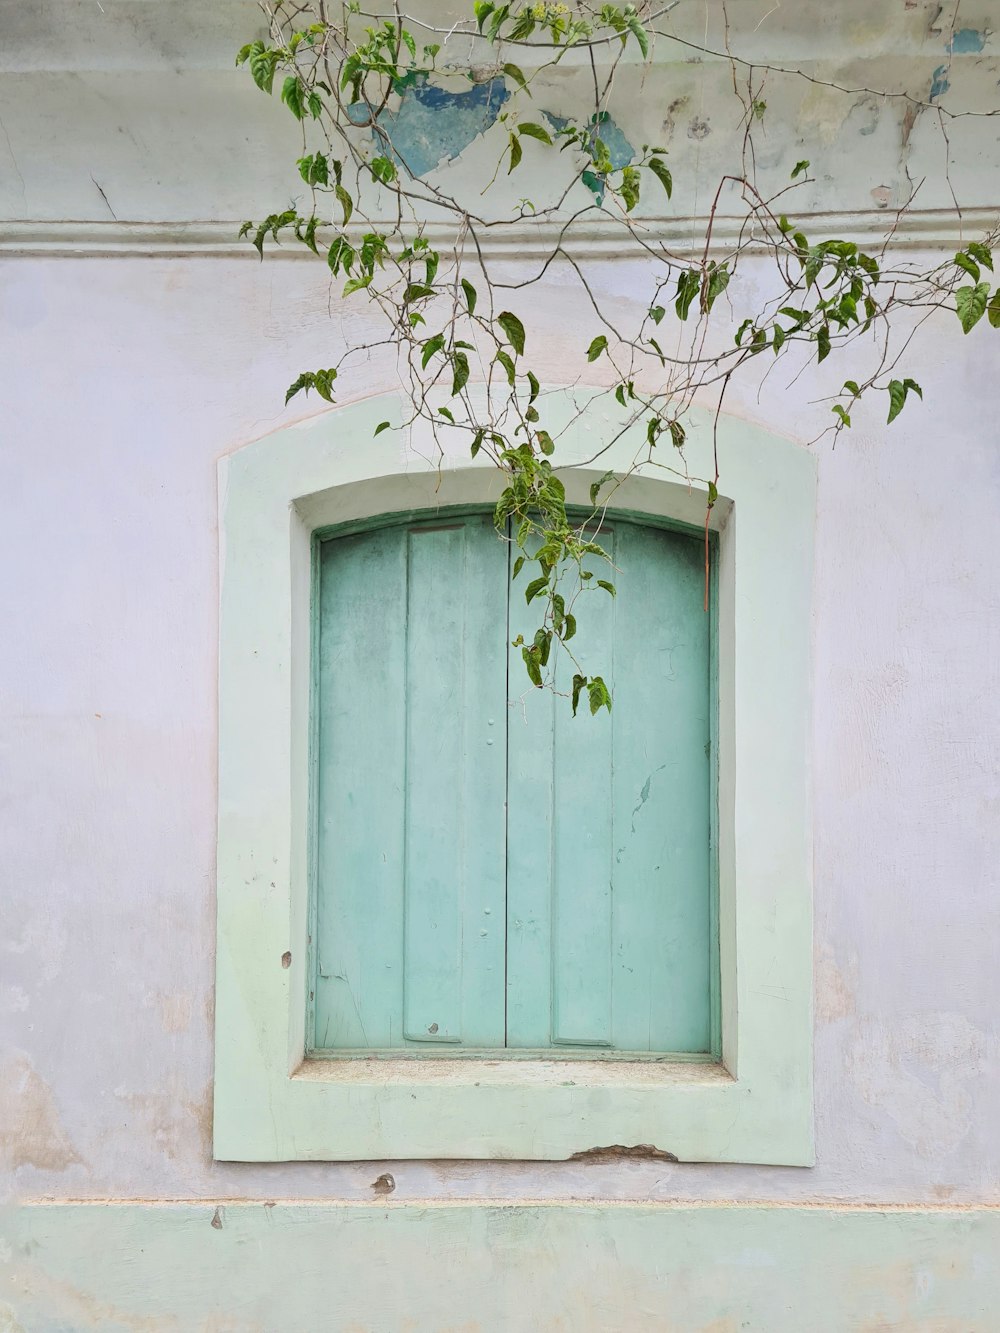 a window with a green frame and a plant growing out of it